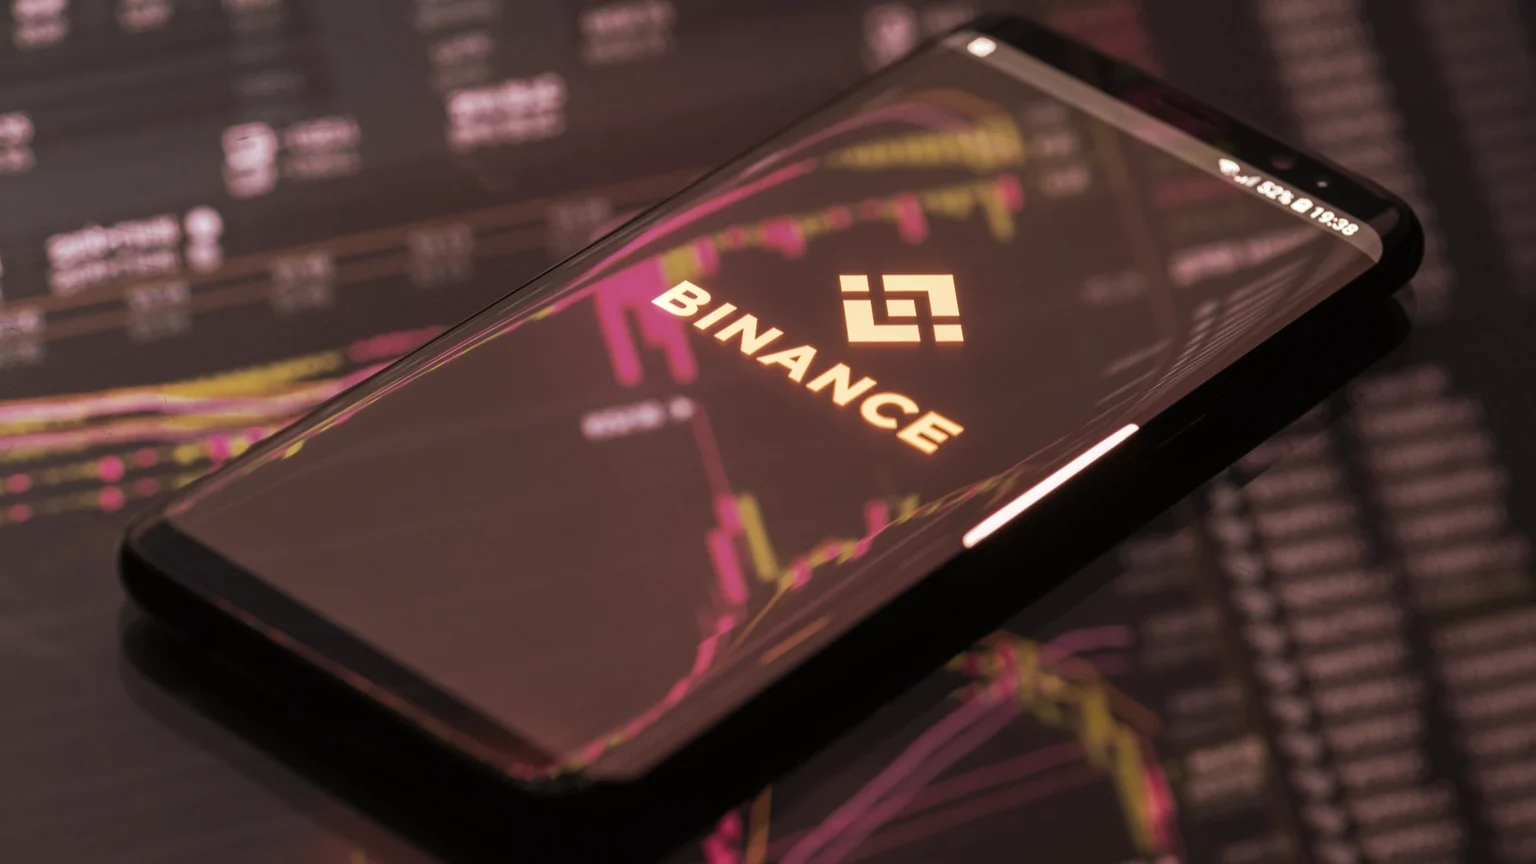 Binance is one of the largest crypto exchanges in the world. Image: Shutterstock.